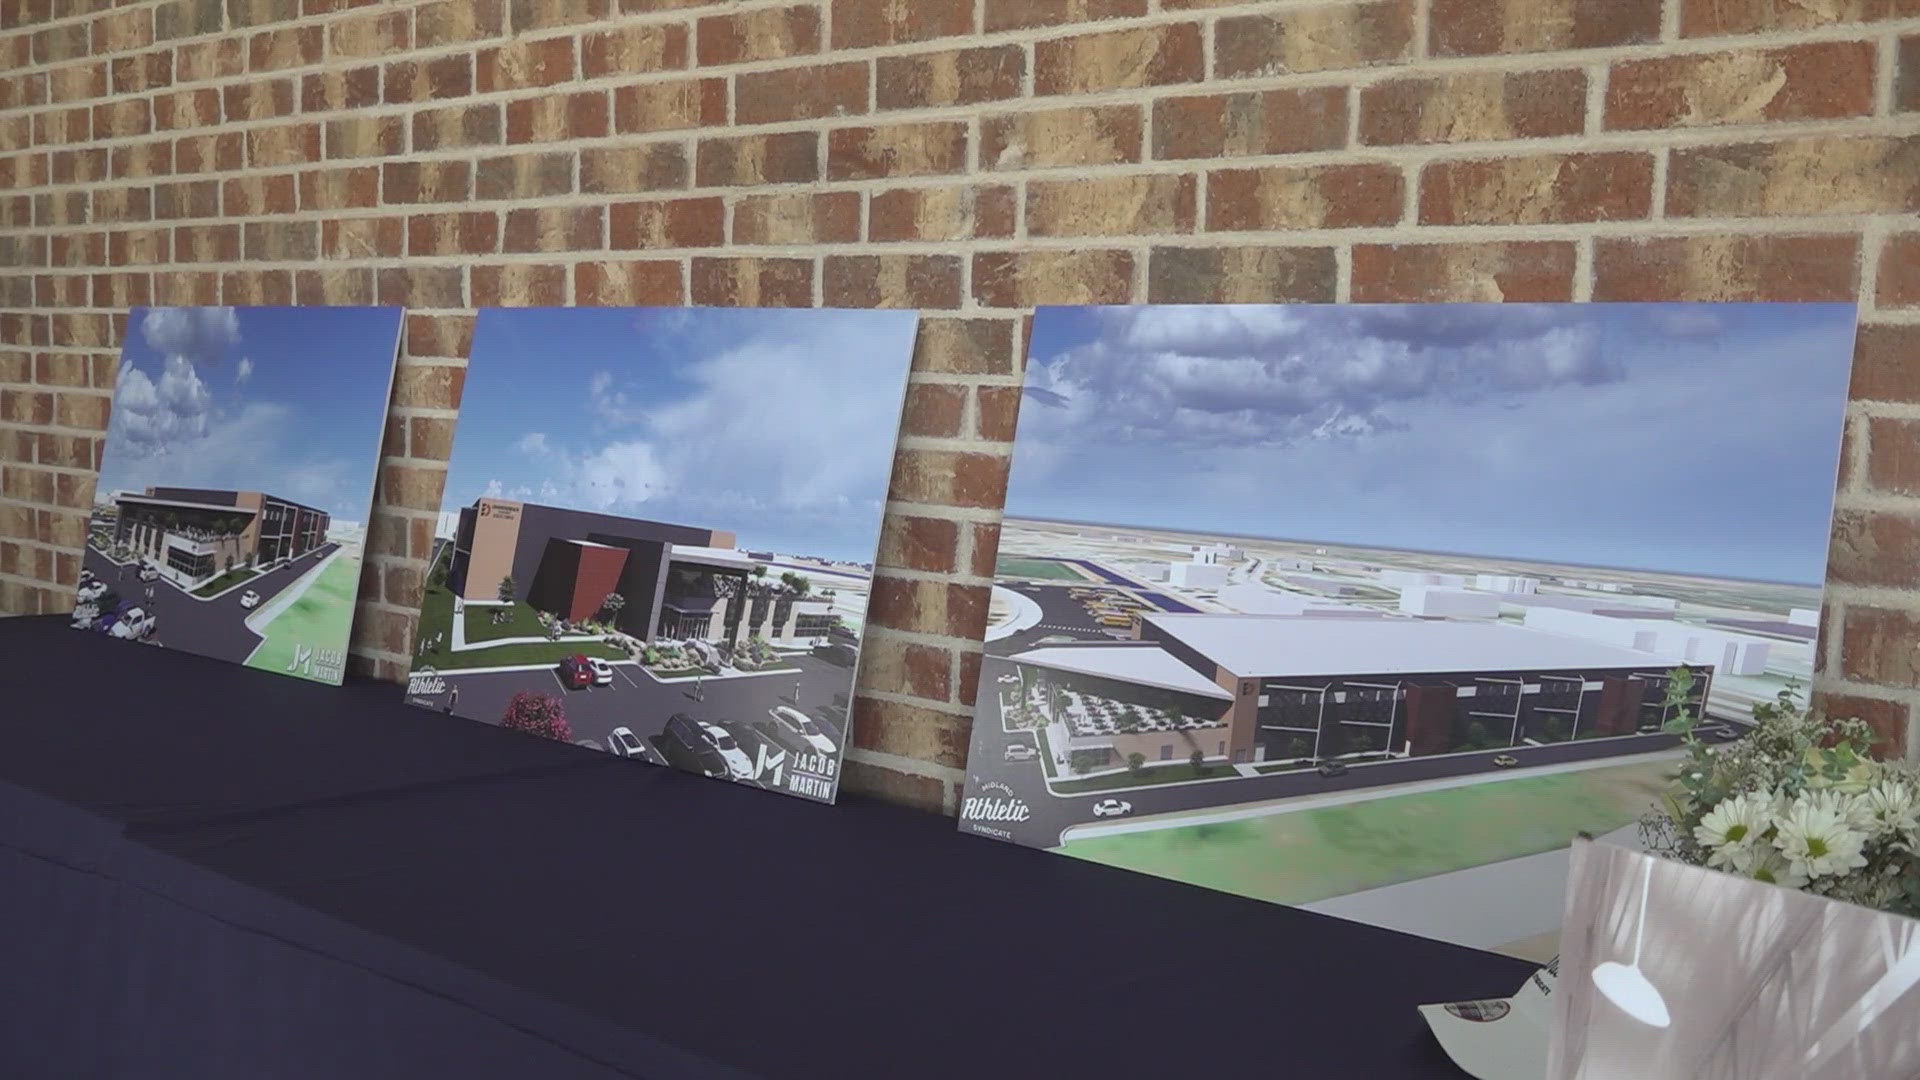 The indoor sports complex will allow the city to host tournaments and keep people out of the harsh West Texas weather.